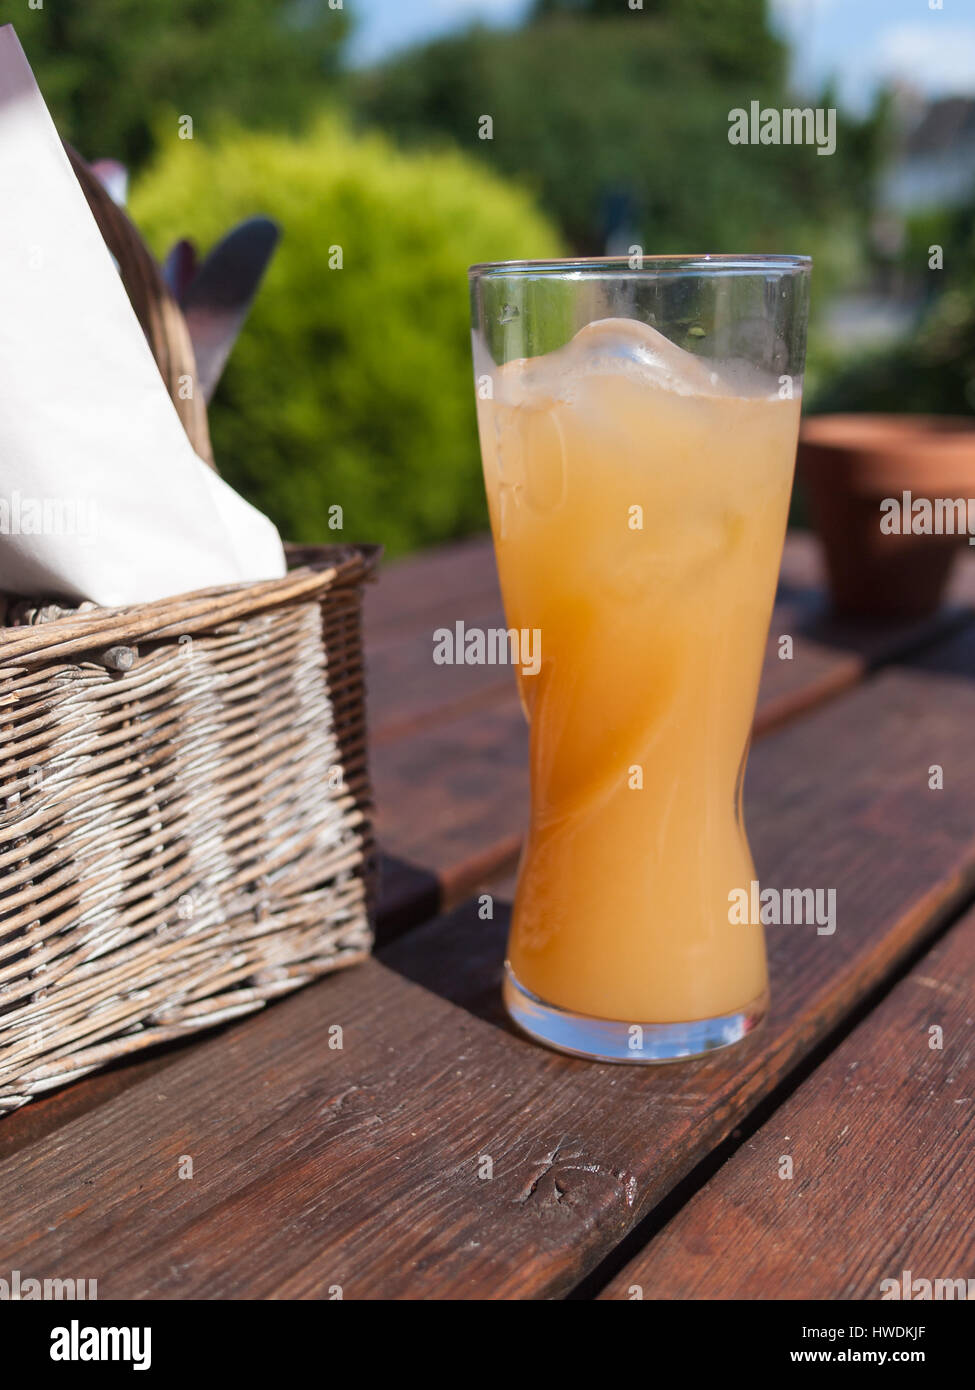 Cold refreshing drink of orange on a warm sunny day on a wooden bench. Stock Photo